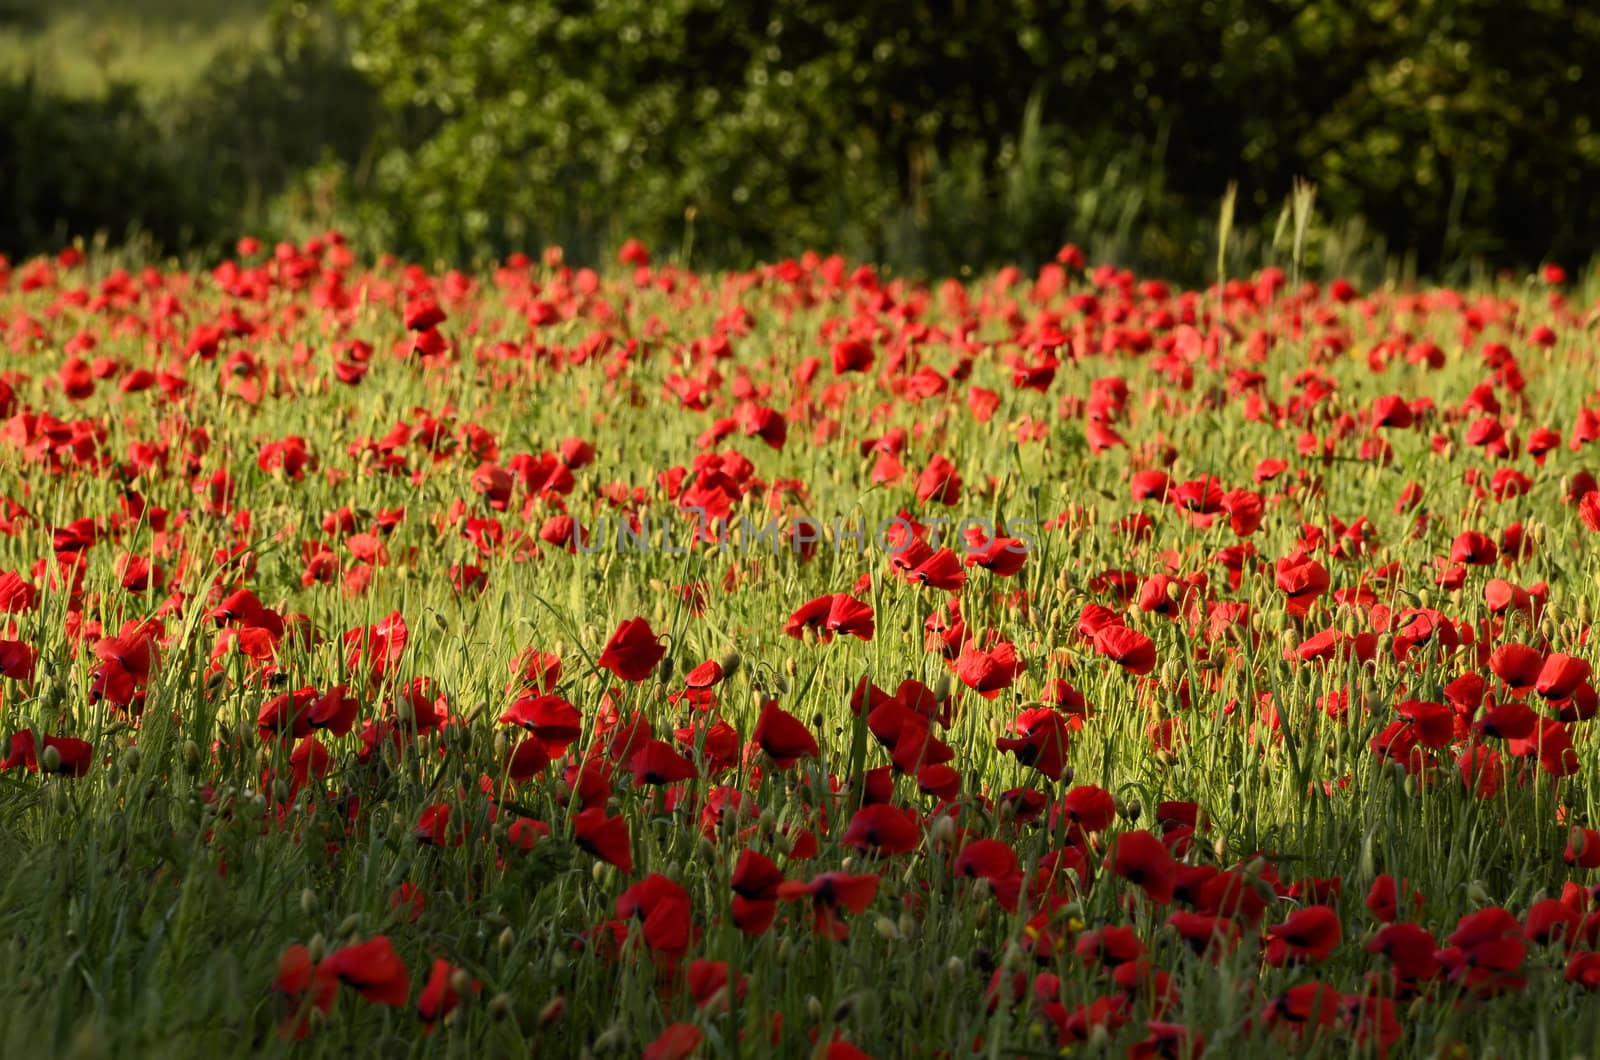 The photo shows a poppy flower on a blurred background of grain growing in a field.